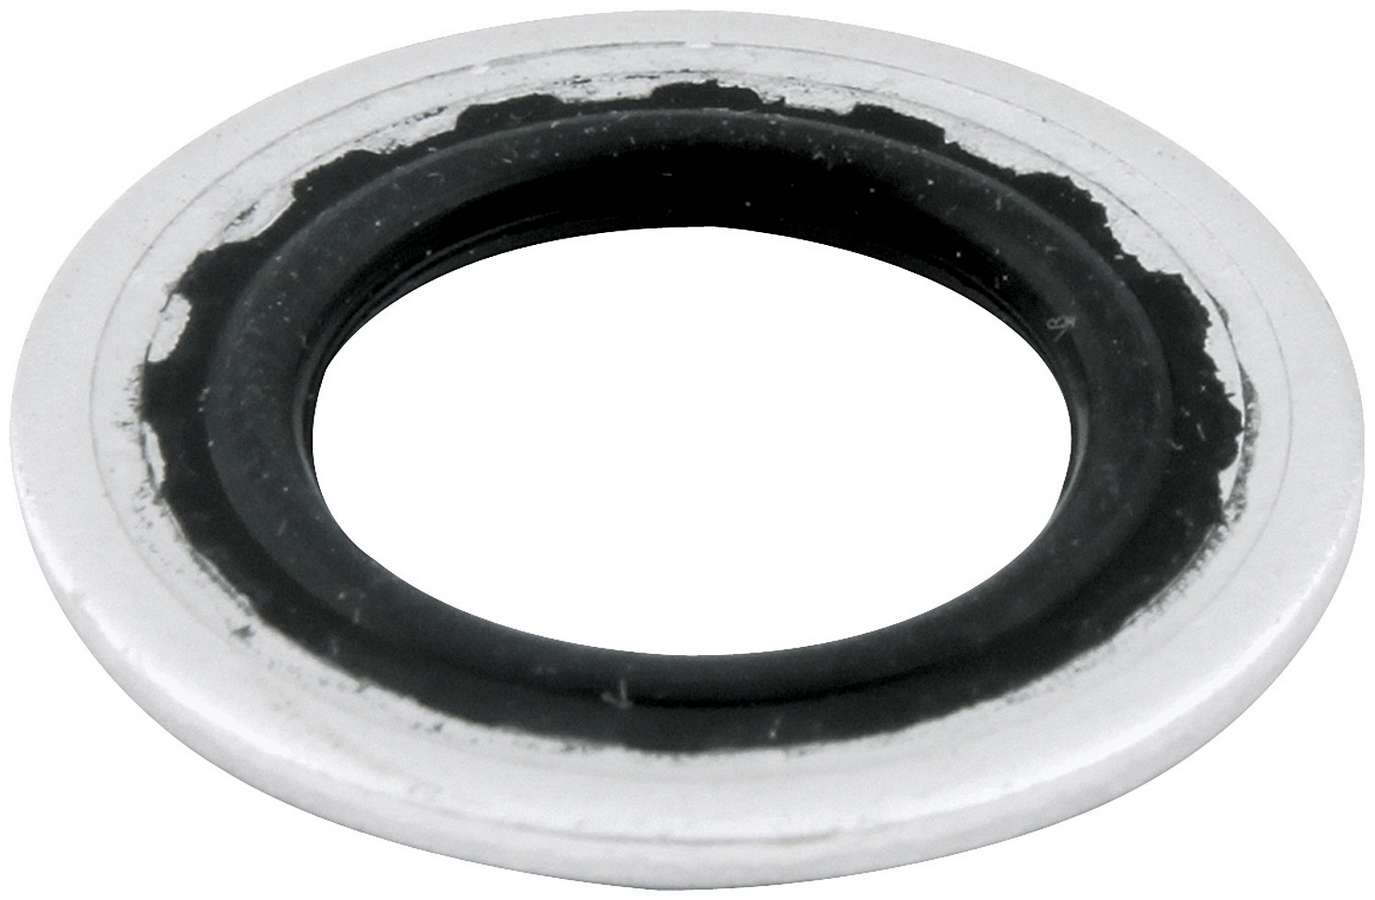 Allstar Performance REPLACEMENT SEALING WASHER FOR WHEEL DISCONNECT